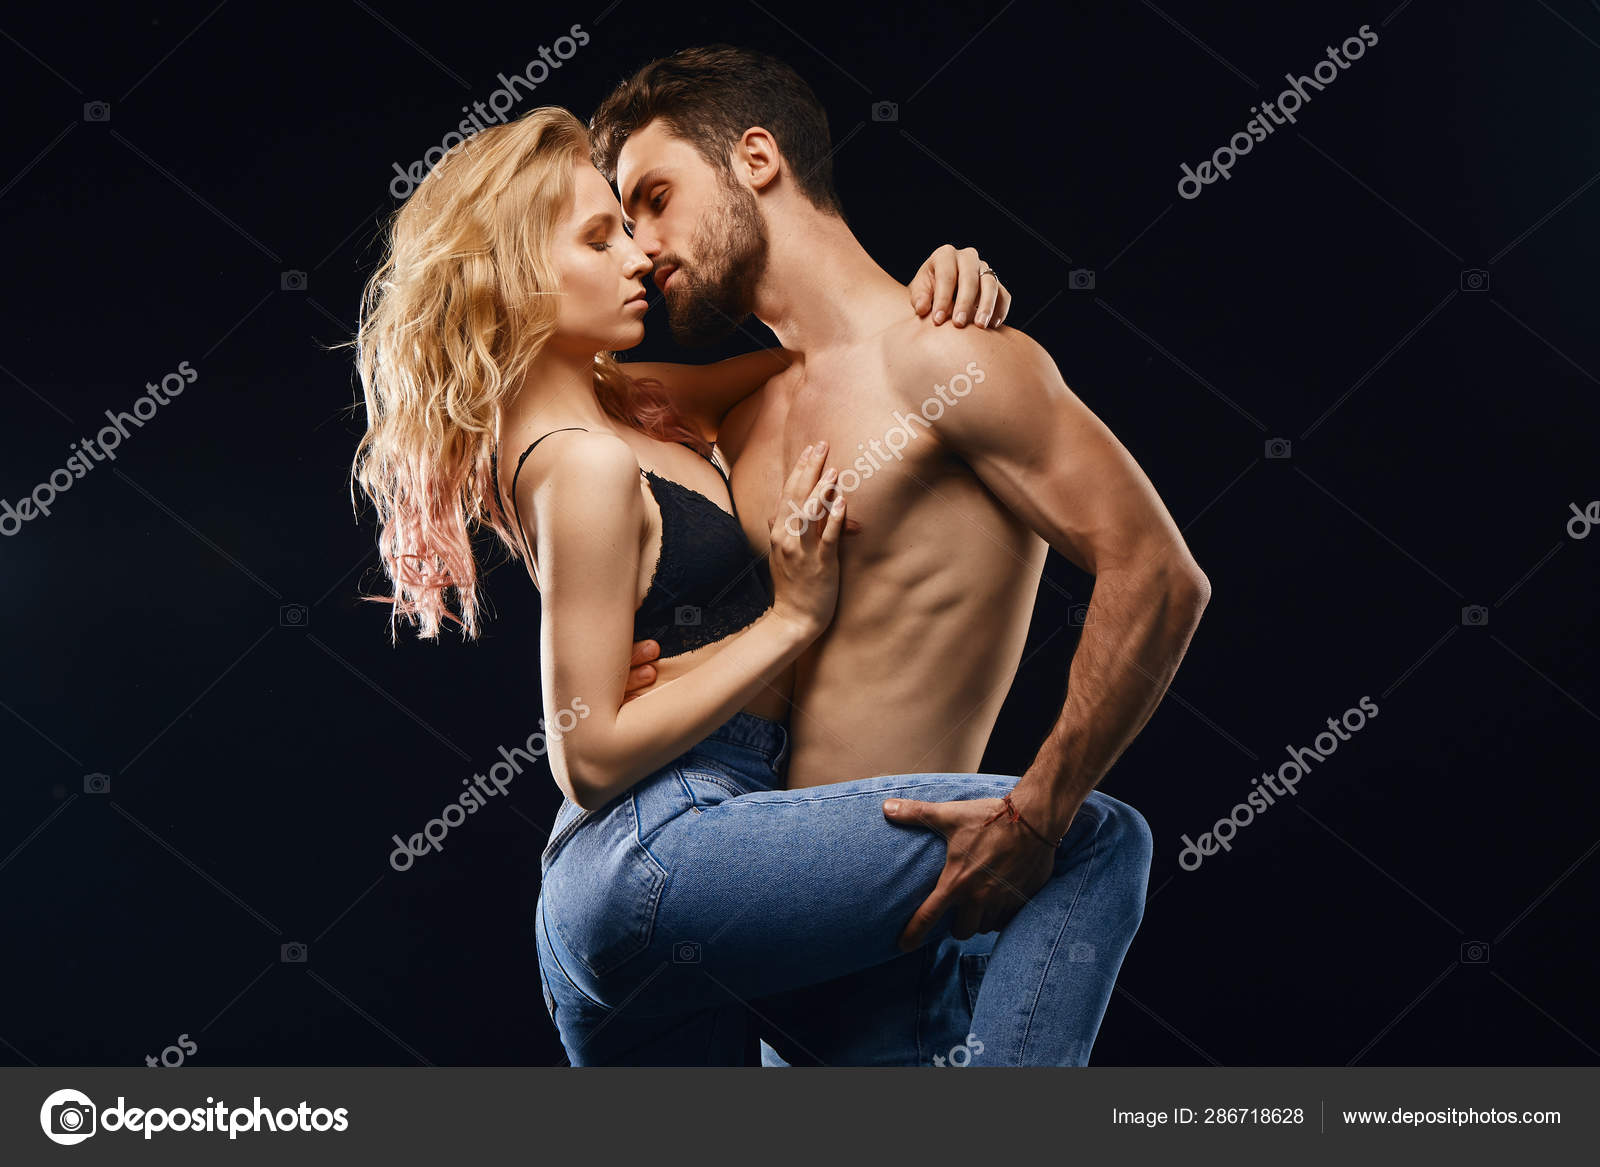 Shirtless man and blonde woman dancing tango in the studio Stock Photo by ©1greyday 286718628